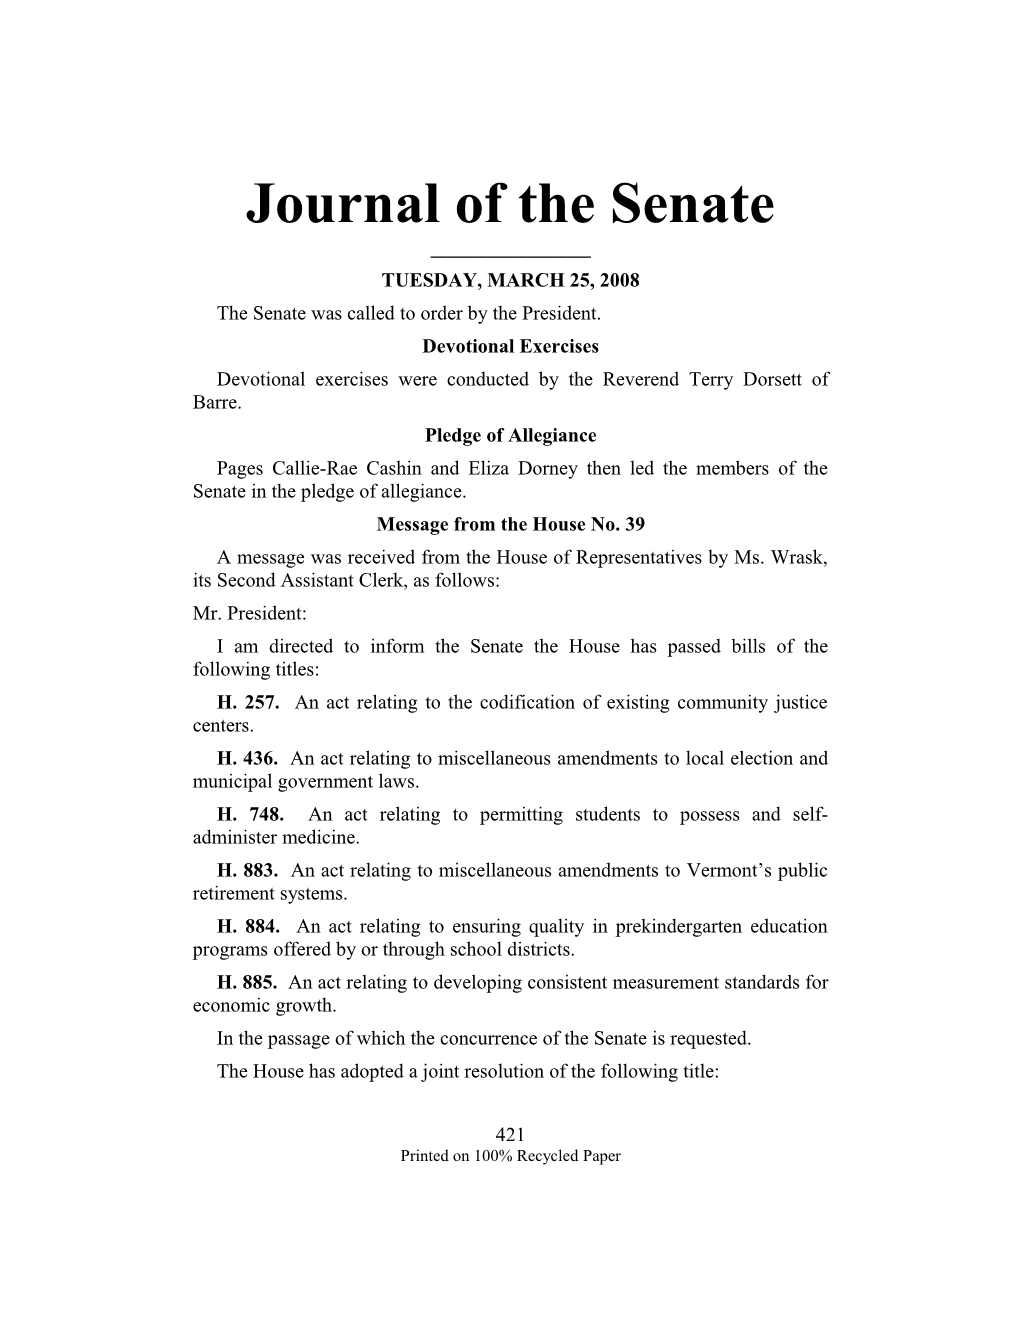 The Senate Was Called to Order by the President s1